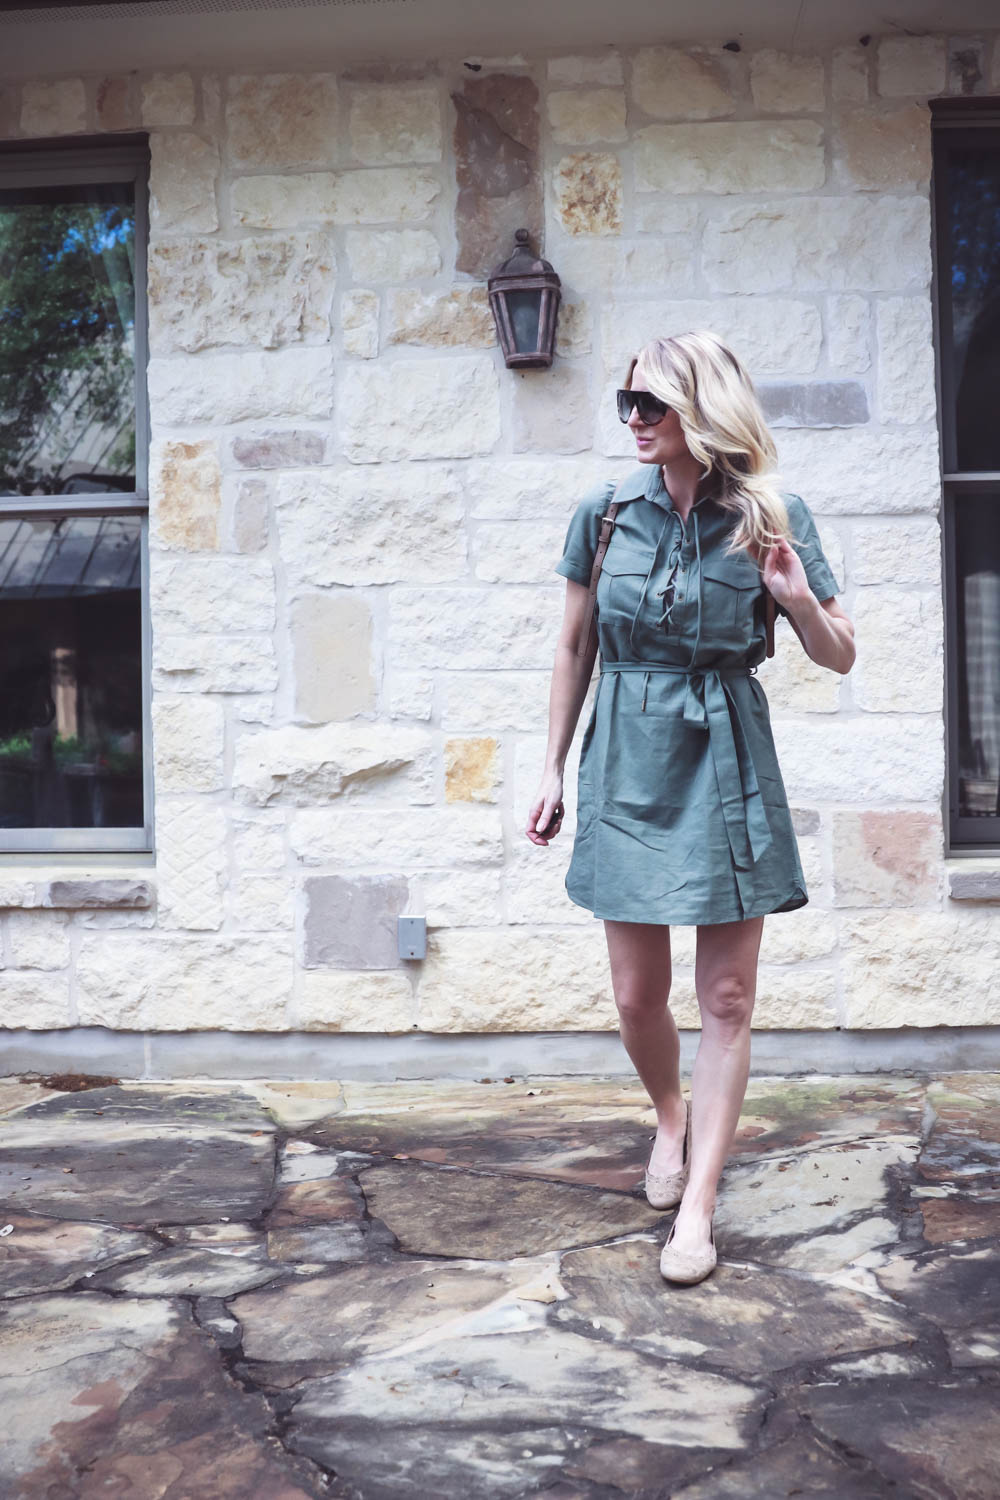 What I Wore video // Erin Busbee, fashion blogger and youtuber from San Antonio, Texas, wearing L'Agence laceup army green dress with Earthies lindi ballet flats in biscuit with her golden retriever 